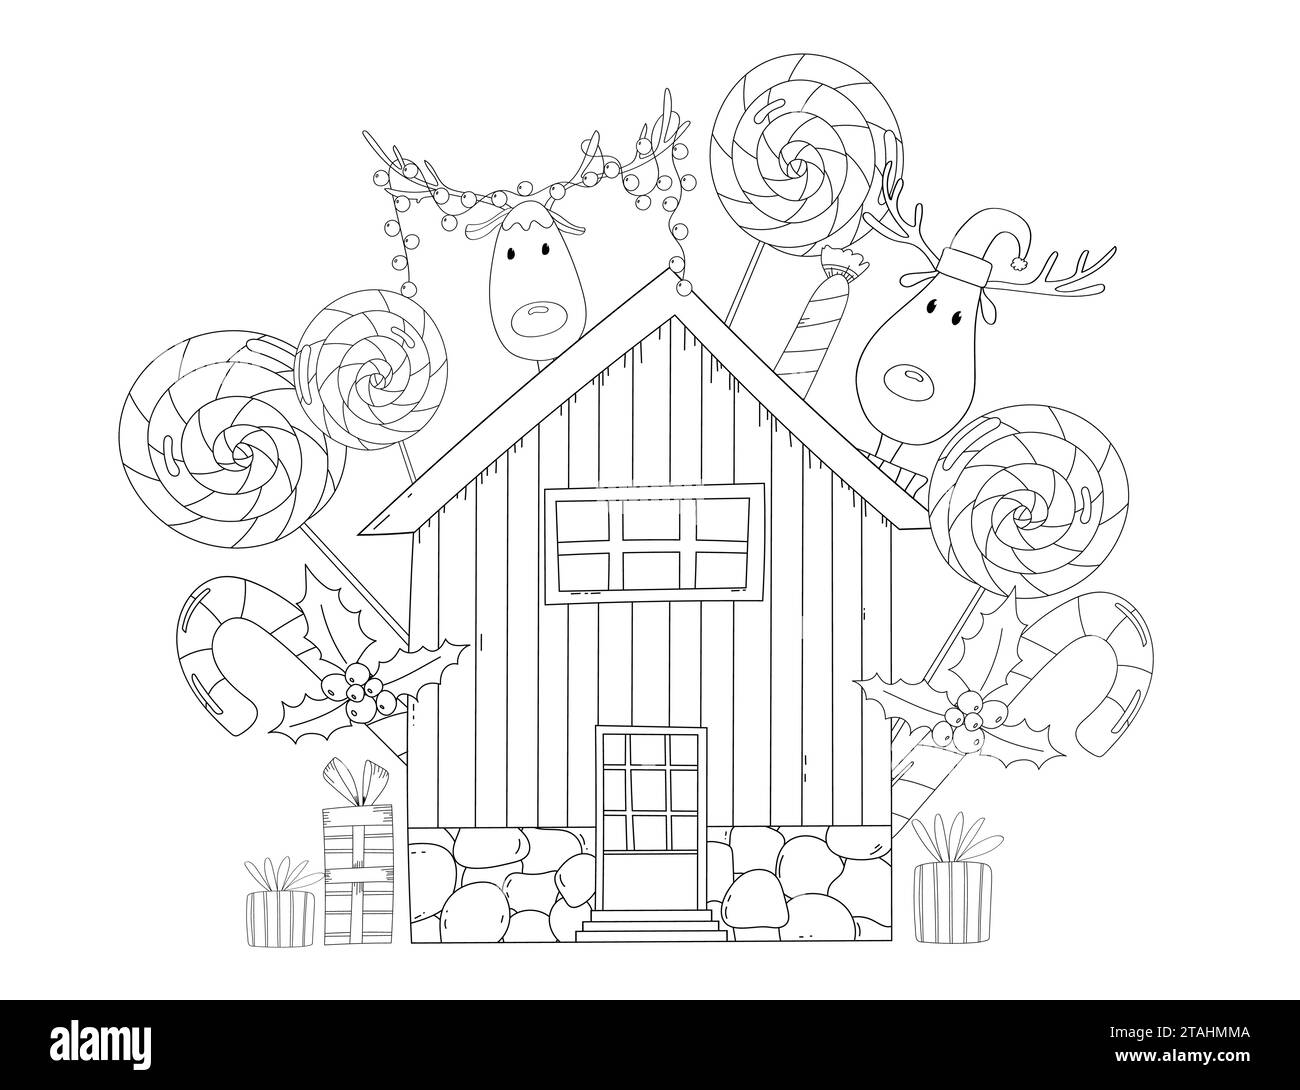 Sweet Little House With Christmas Gifts, Decorations, Candies, And Santa'S Reindeer Is A Festive Illustration For Children To Color Stock Vector